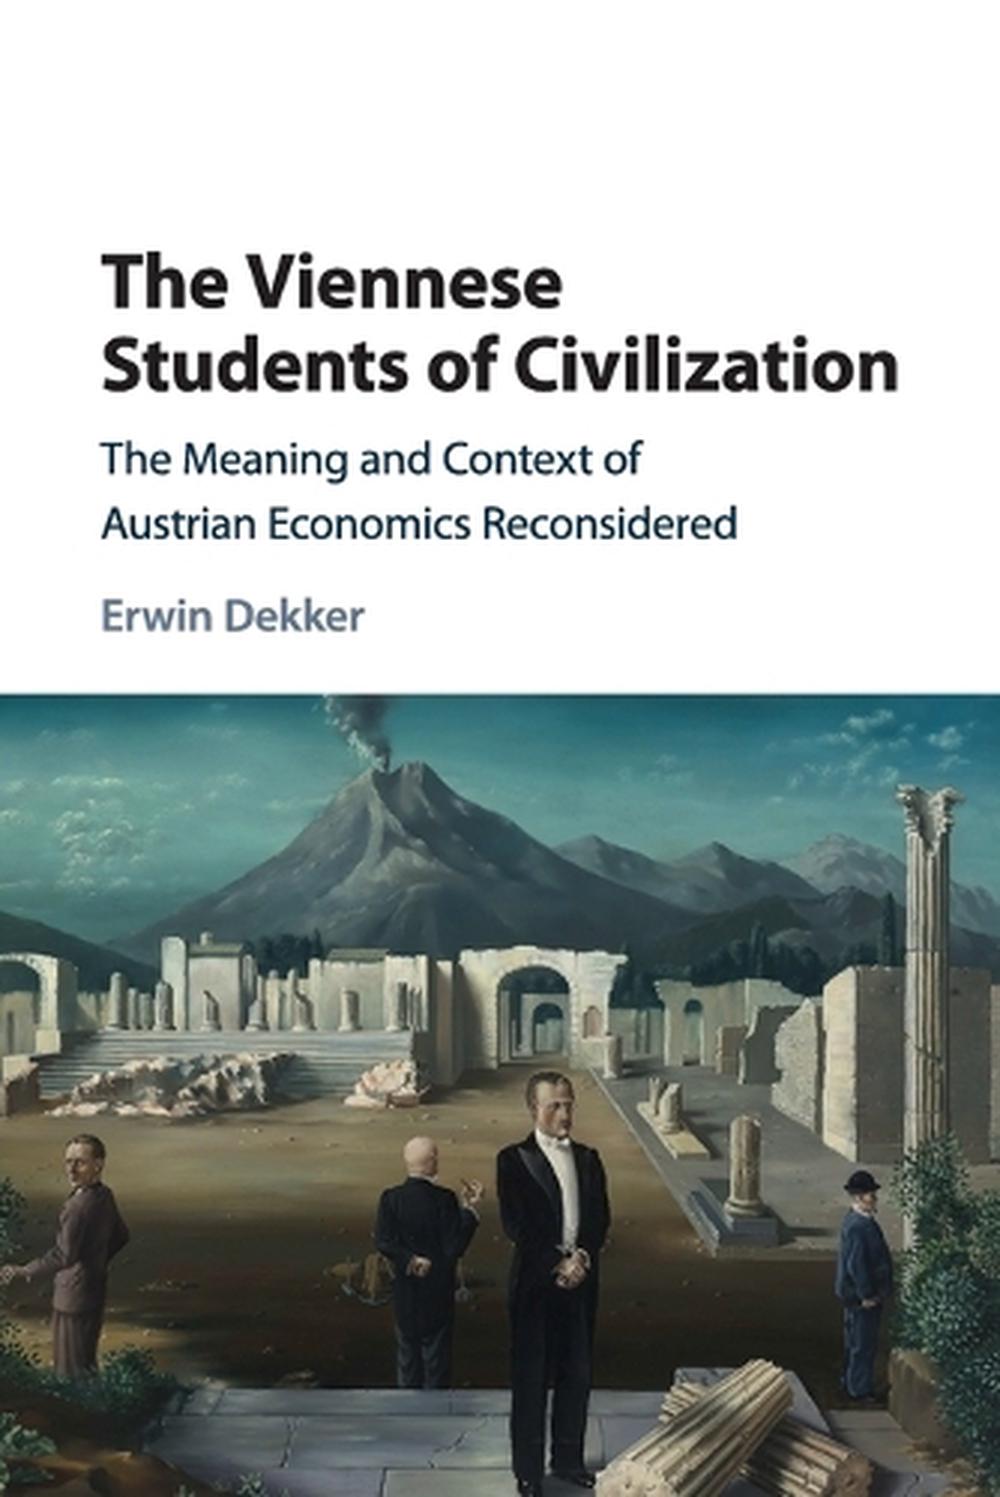 civilization meaning